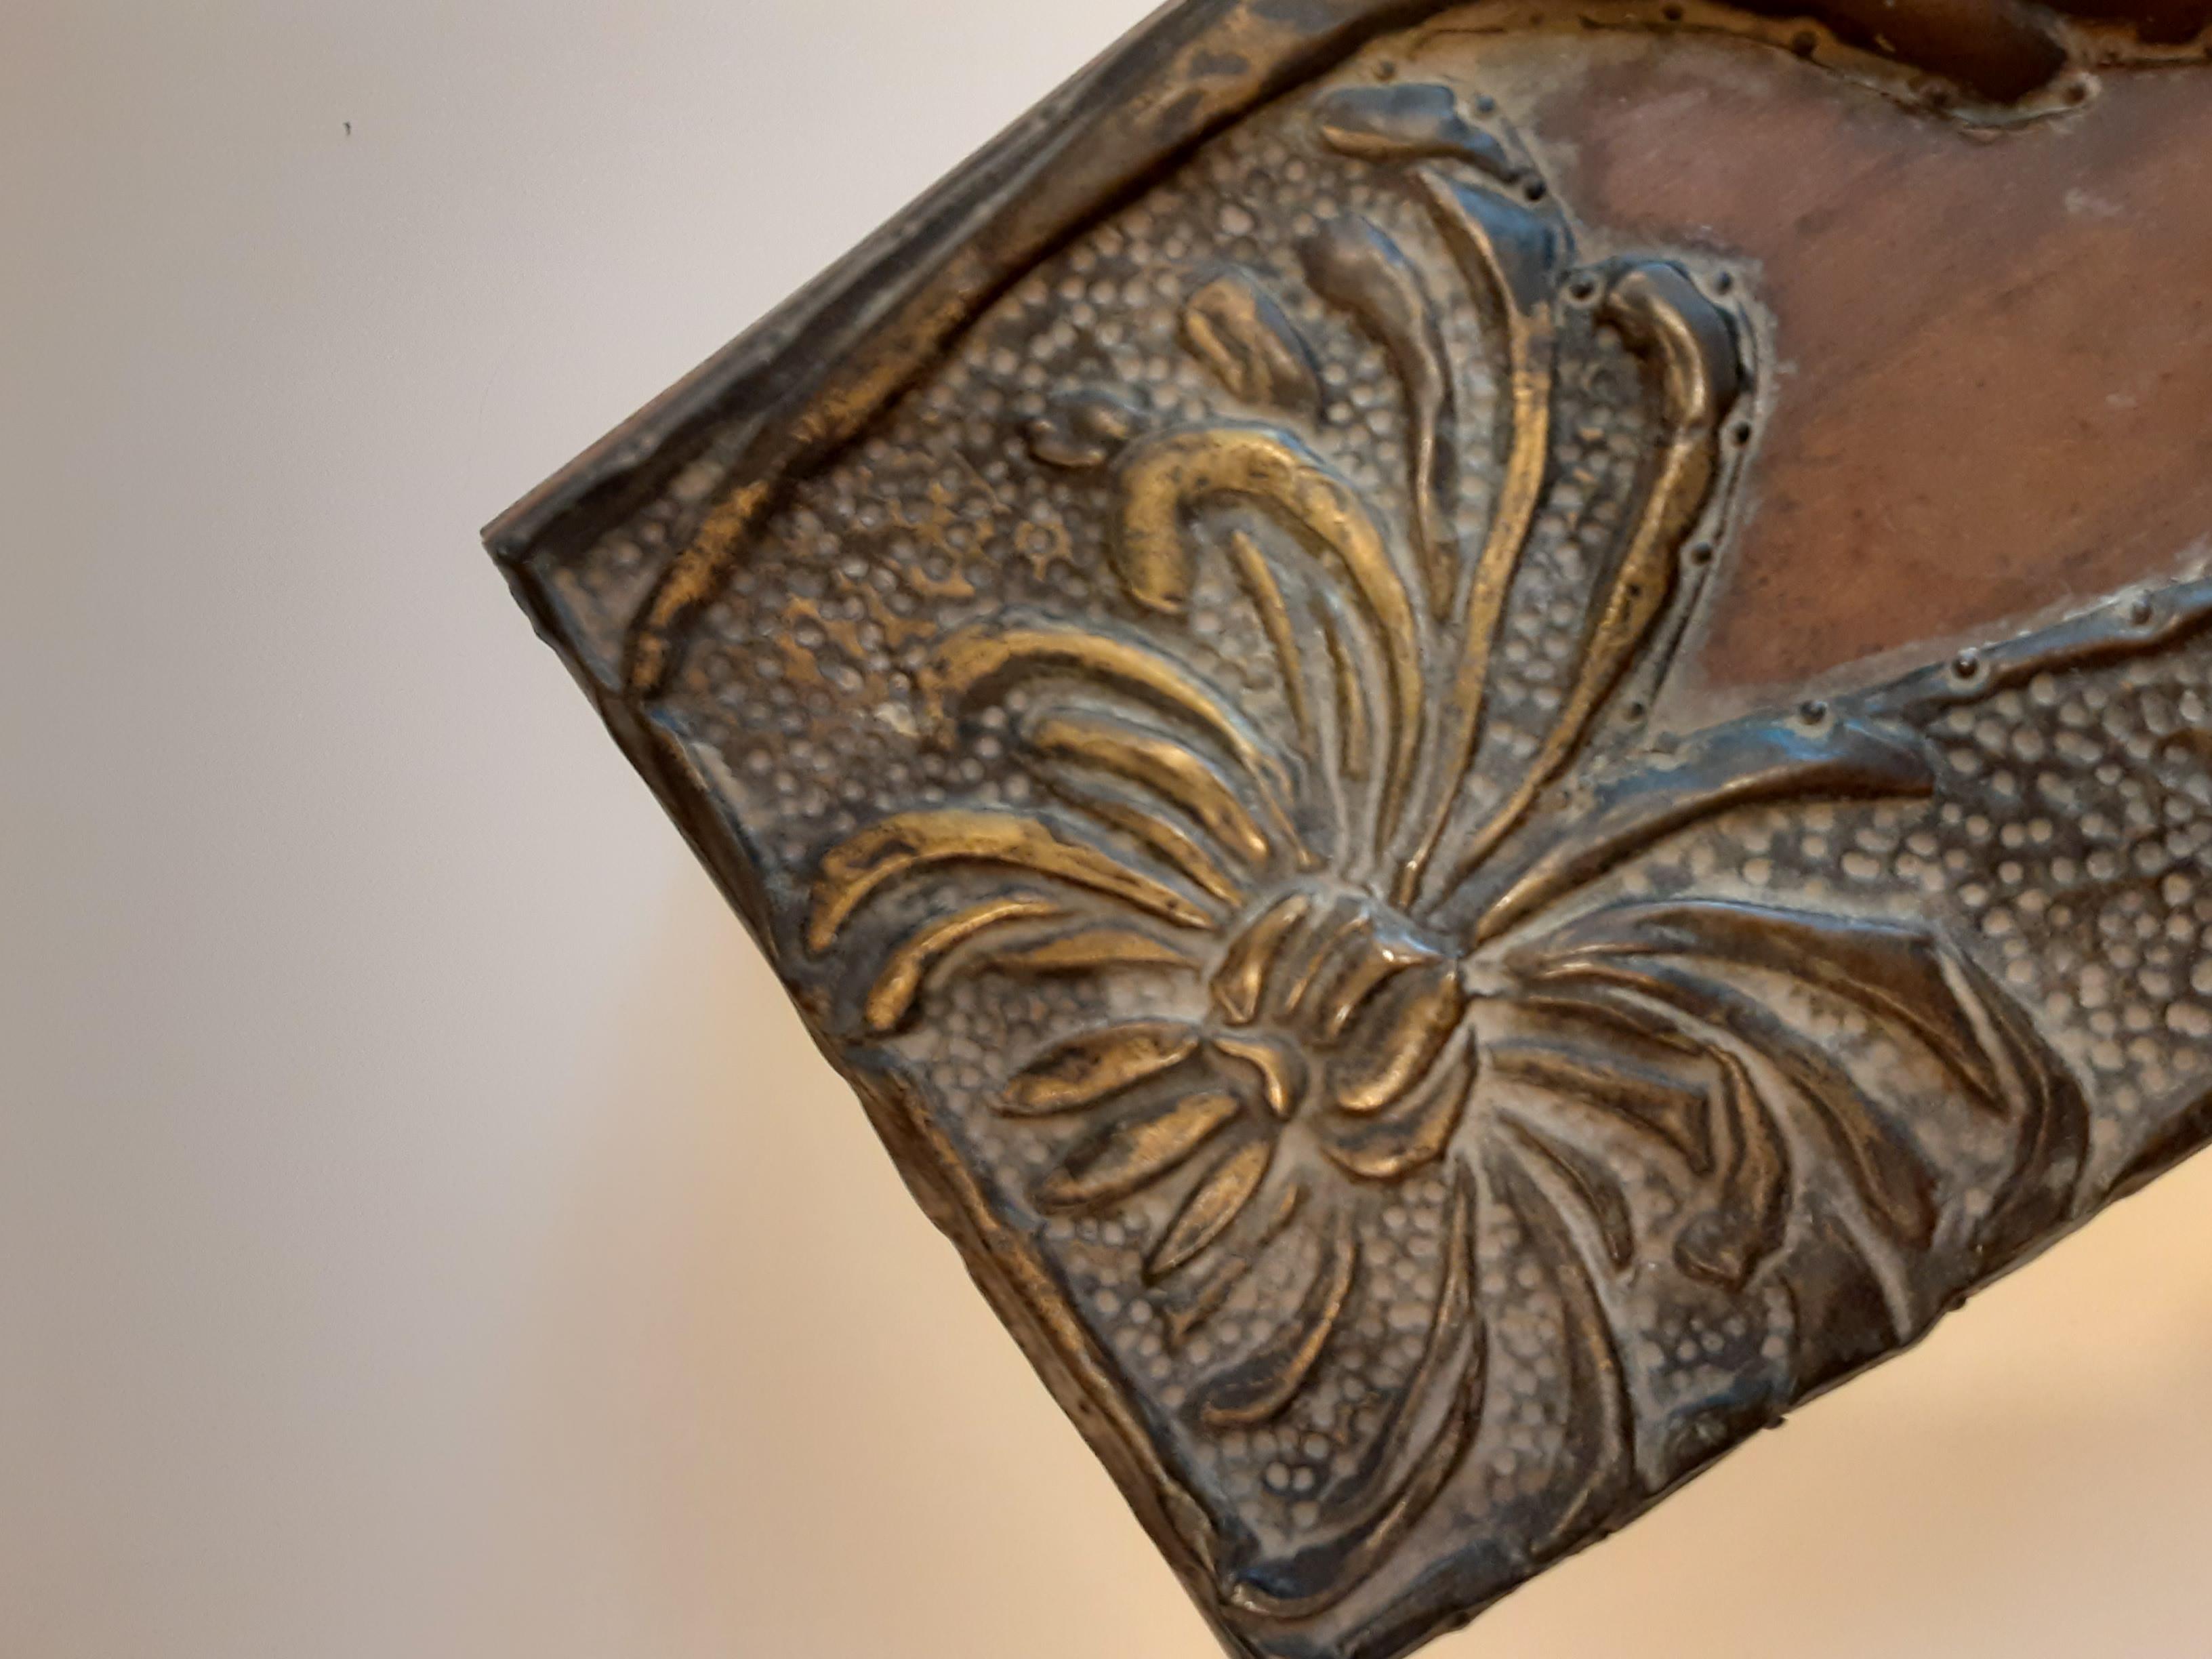 This elegant Art Nouveau box was originally made in France circa. 1910, and remains in very good condition. It was acquired from a French estate. The lid of the box is decorated with beautifully intricate metal (possibly bronze) scrollwork flowers